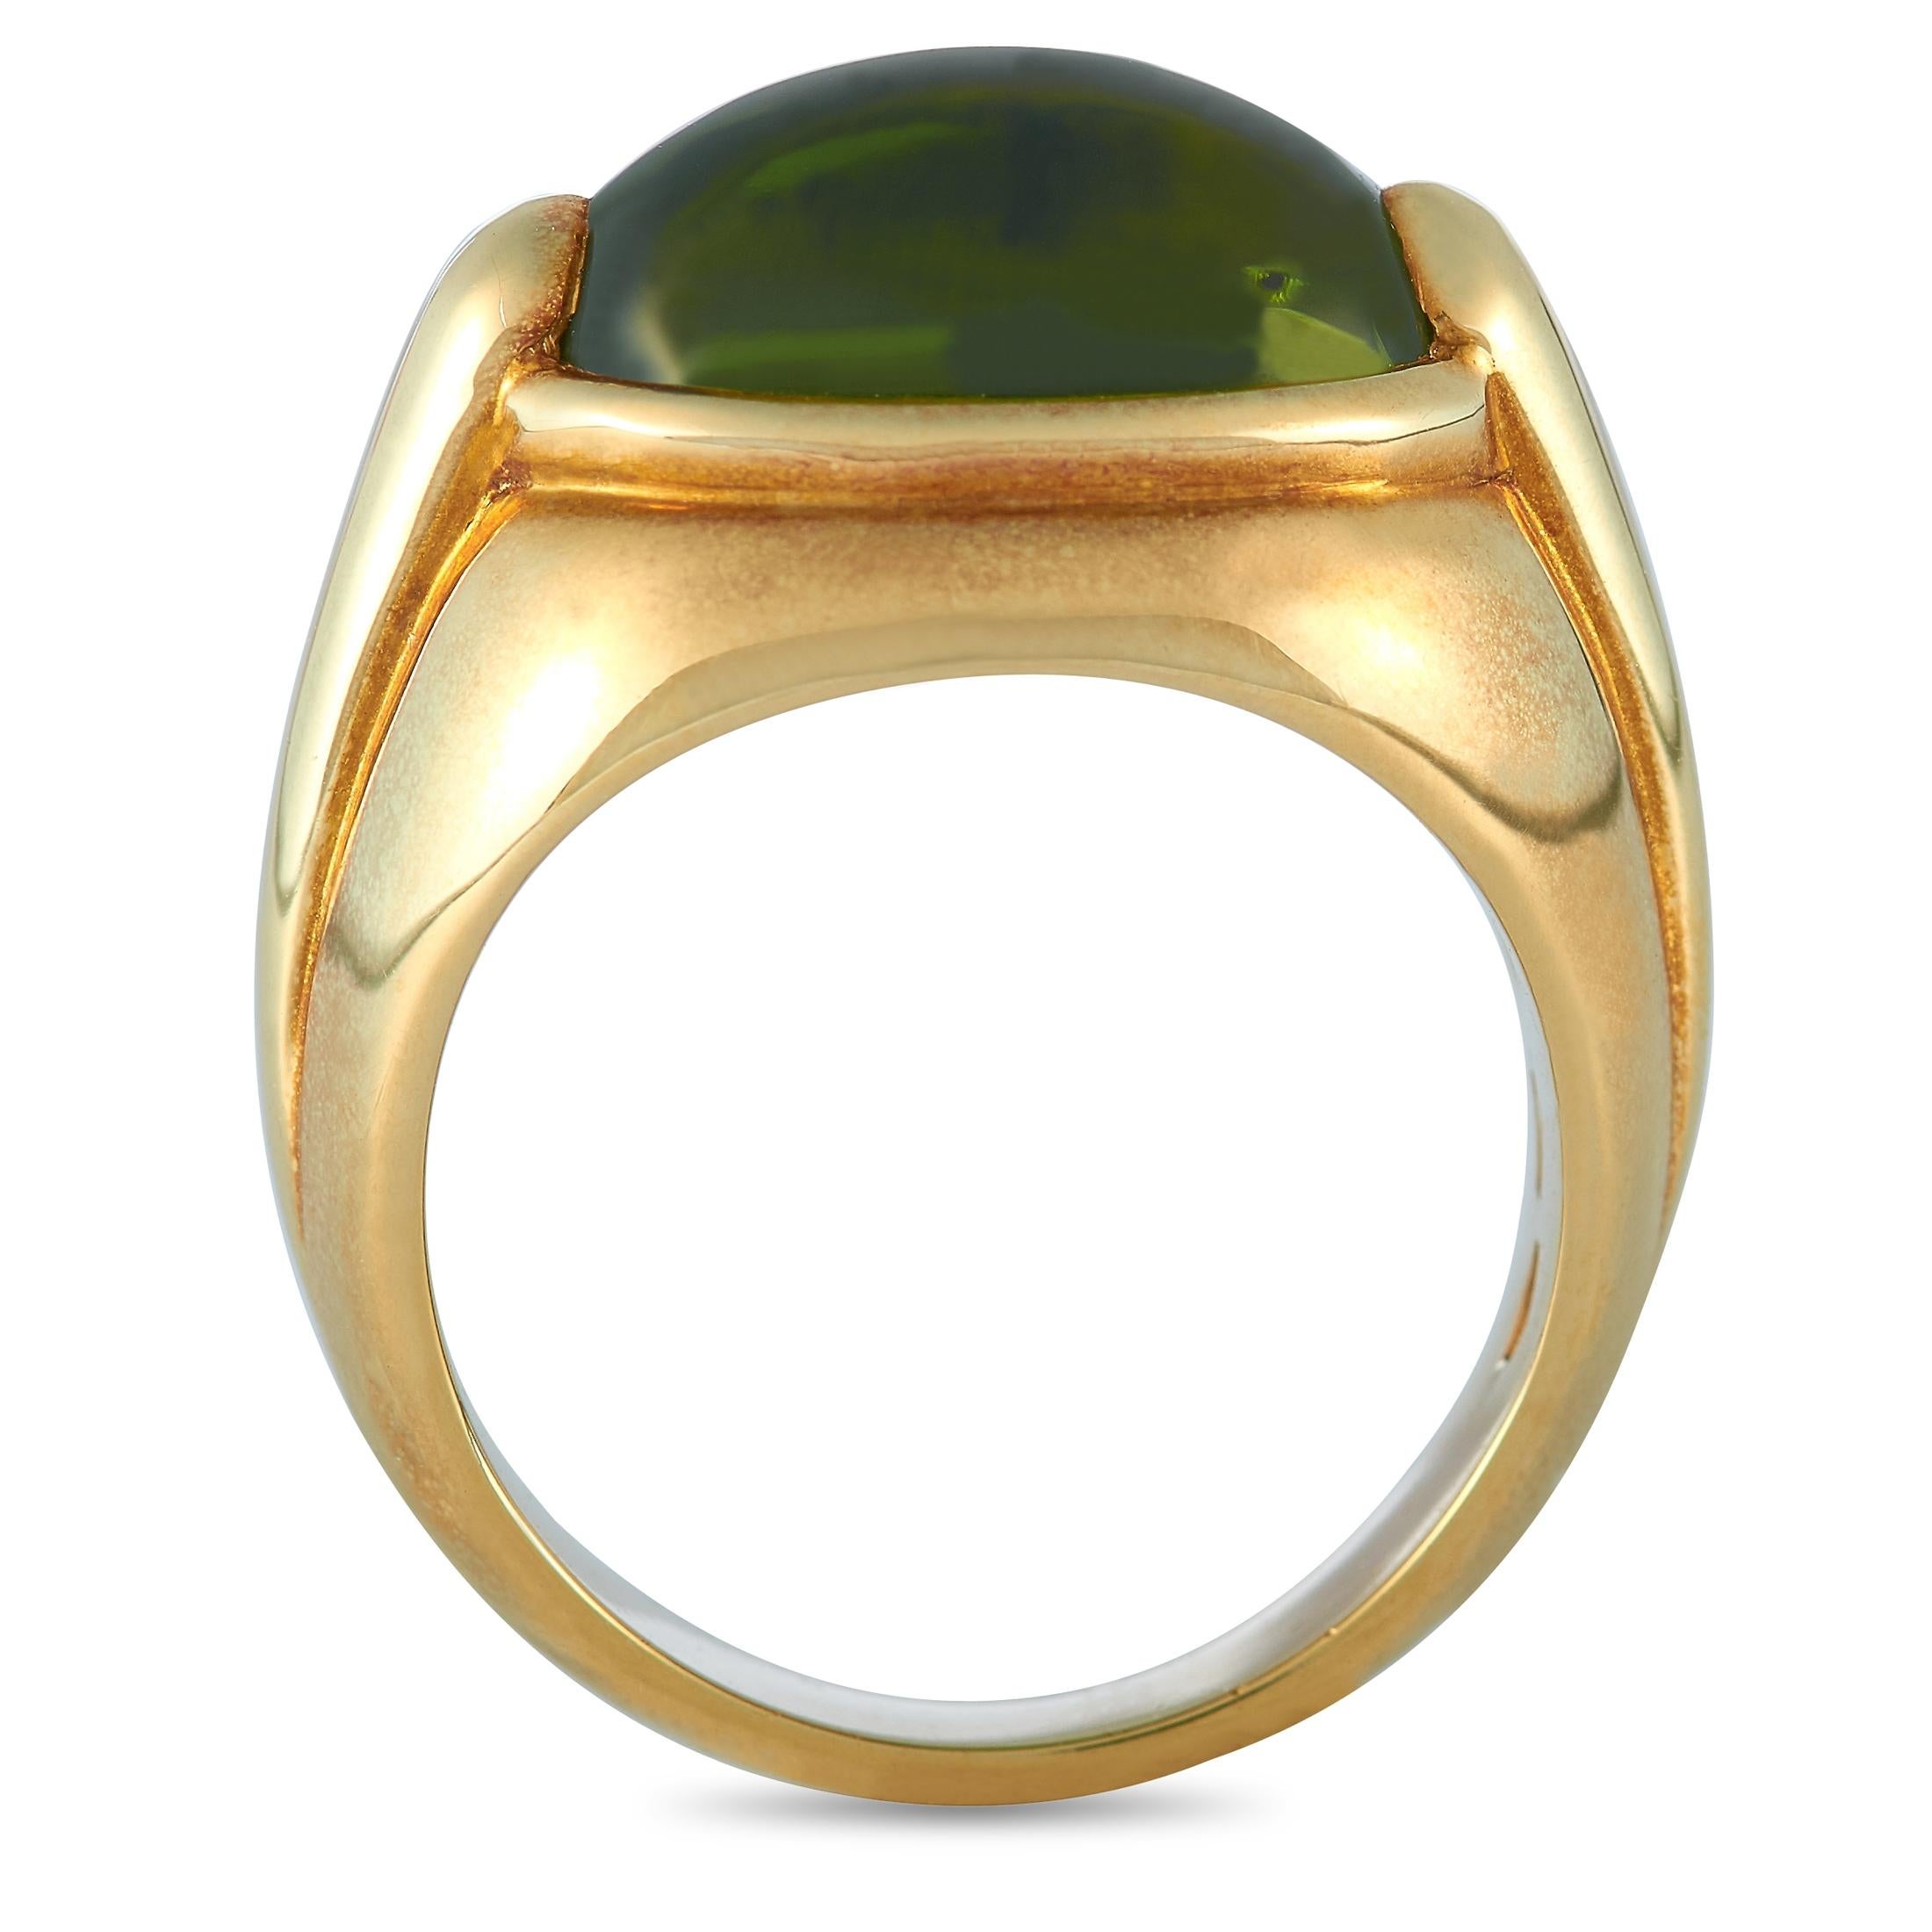 This Bvlgari ring is made of 18K yellow gold and set with a peridot. The ring weighs 14 grams and boasts band thickness of 3 mm and top height of 8 mm, while top dimensions measure 15 by 10 mm.
 
 Offered in estate condition, this jewelry piece